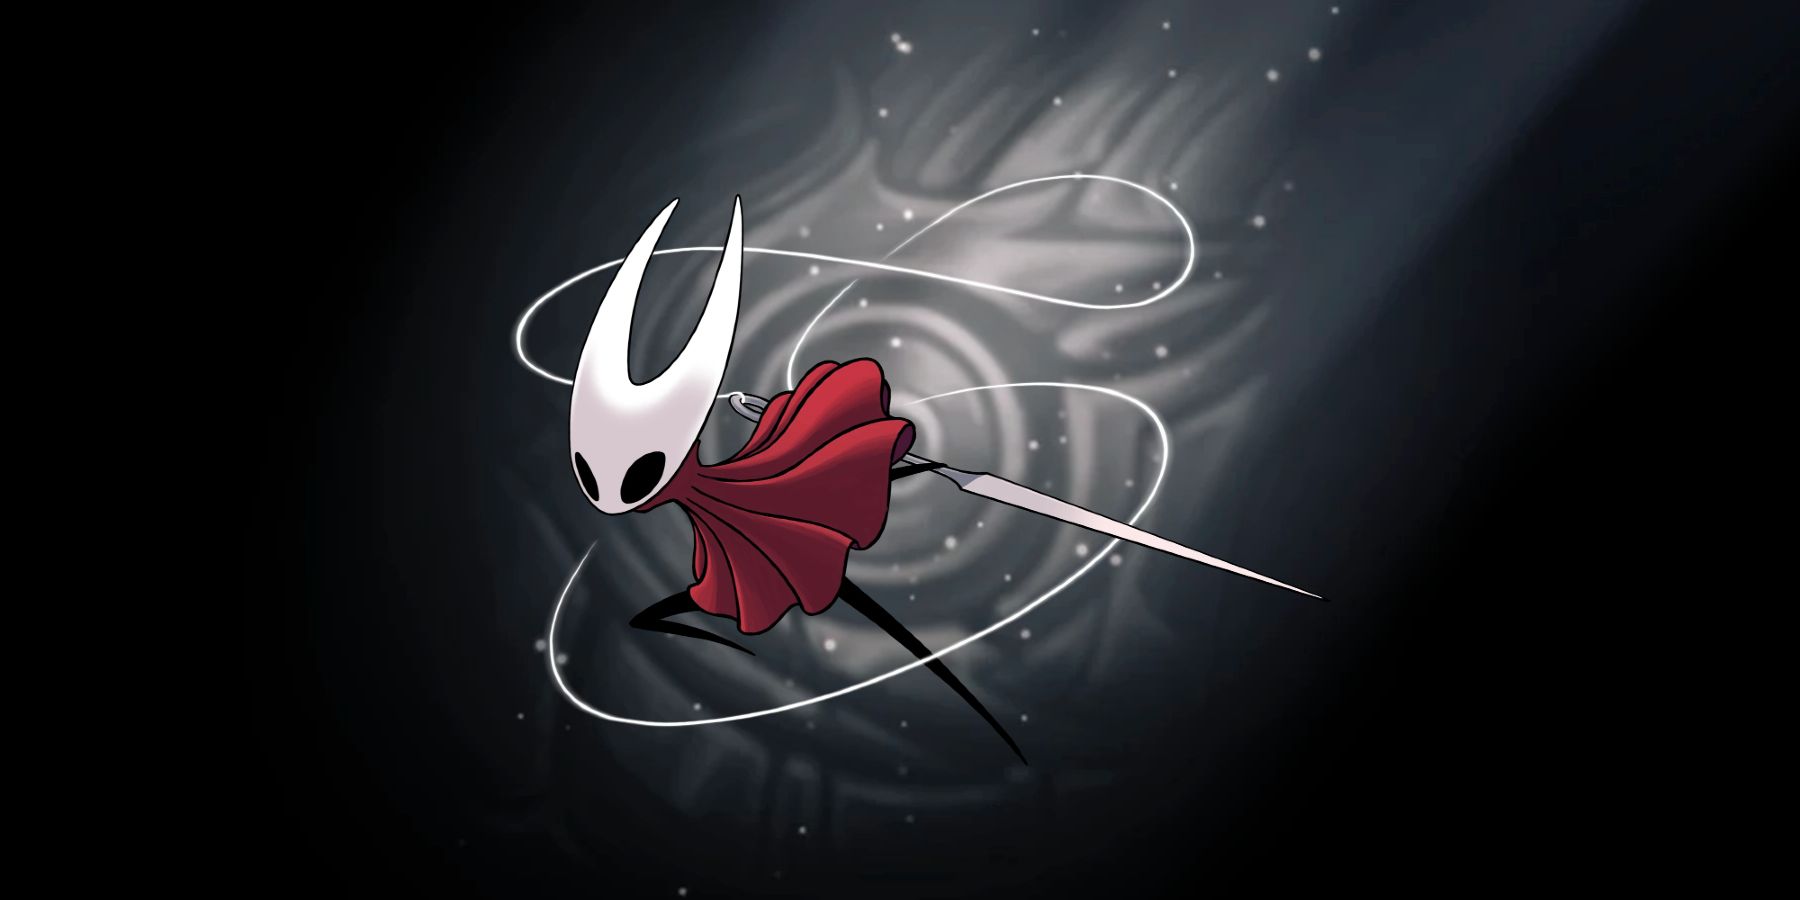 hollow knight 2 everything we know